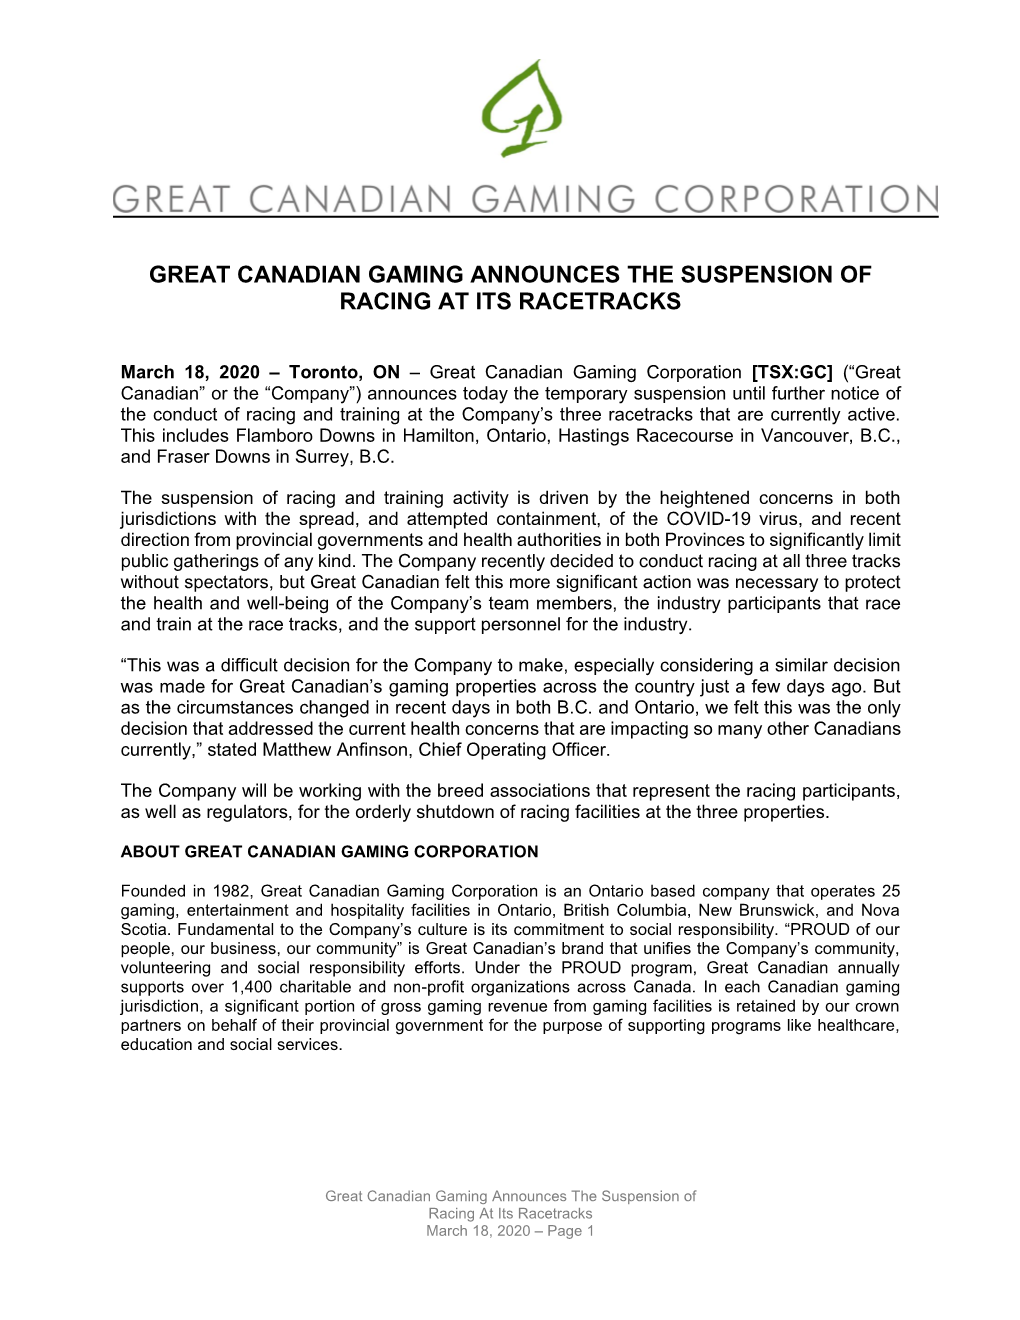 Great Canadian Gaming Announces the Suspension of Racing at Its Racetracks